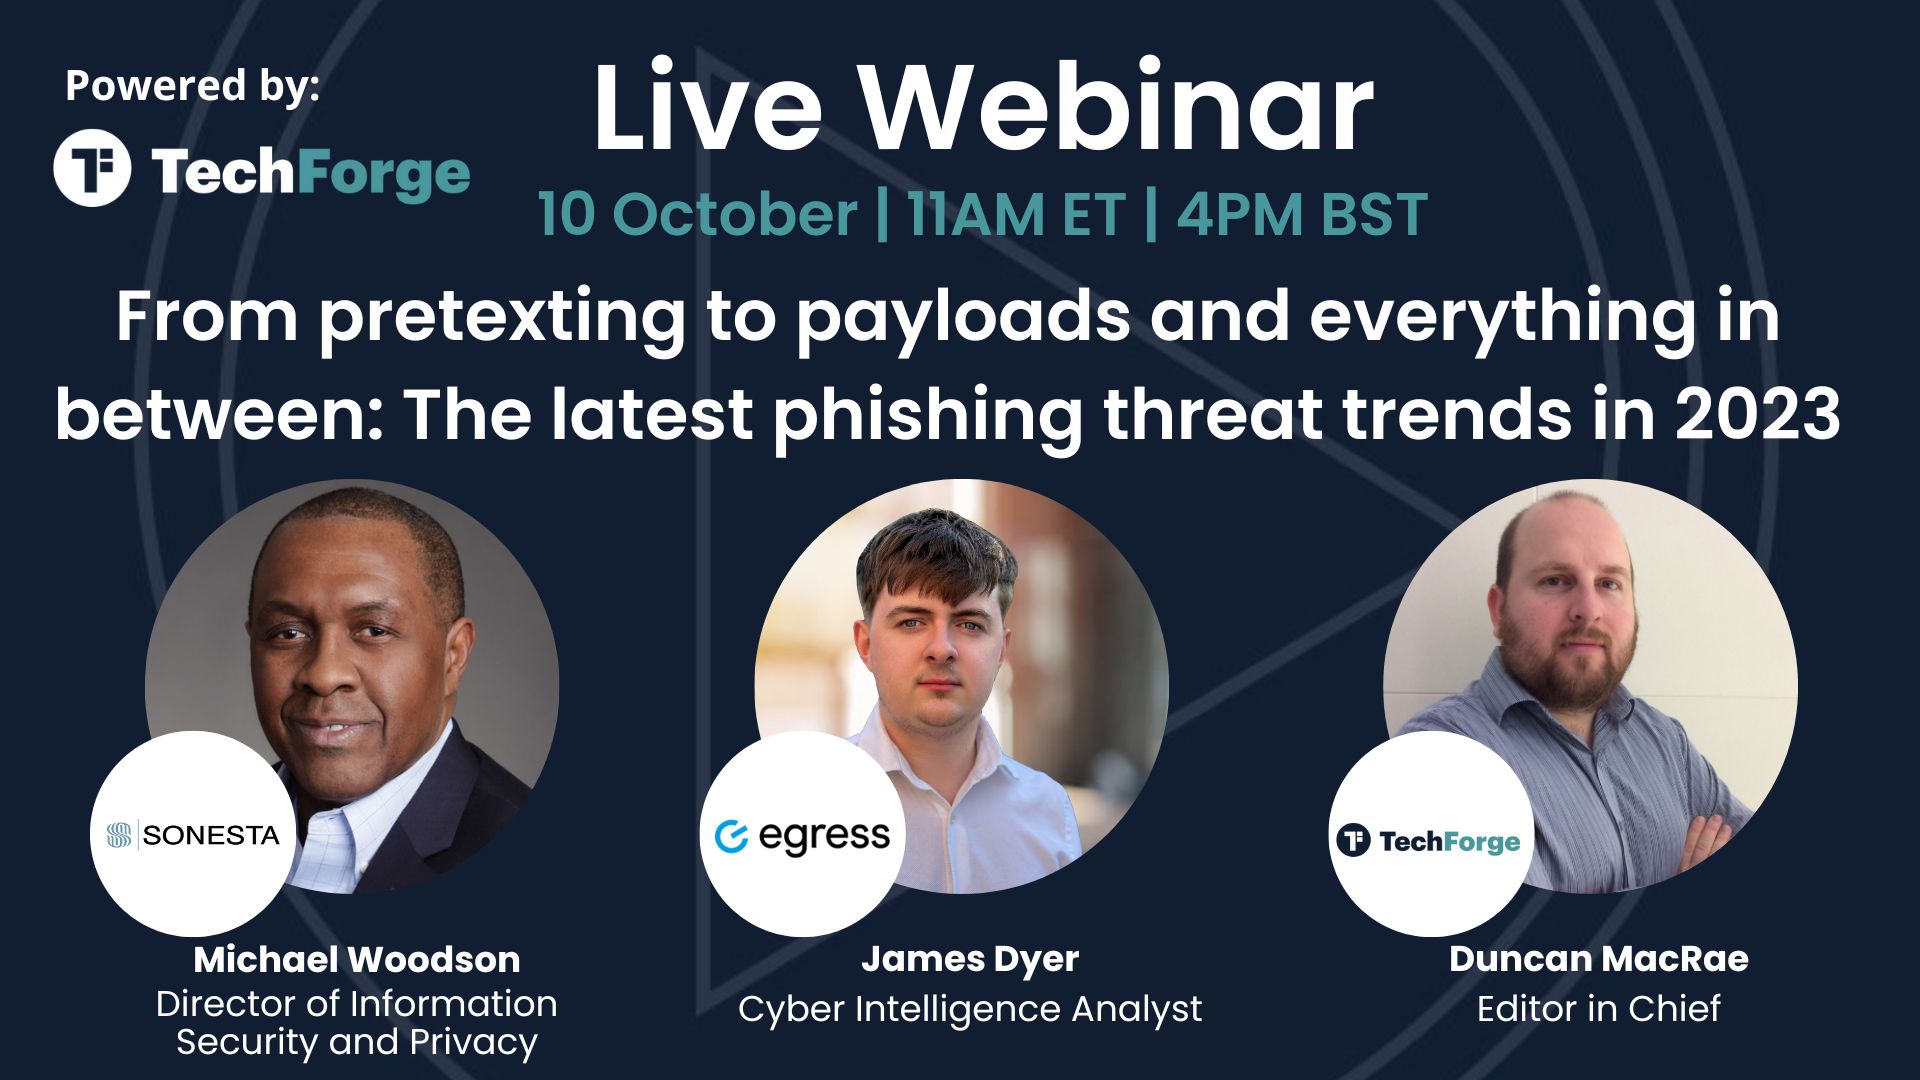 Webinar - The latest phishing threat trends in 2023, Online Event